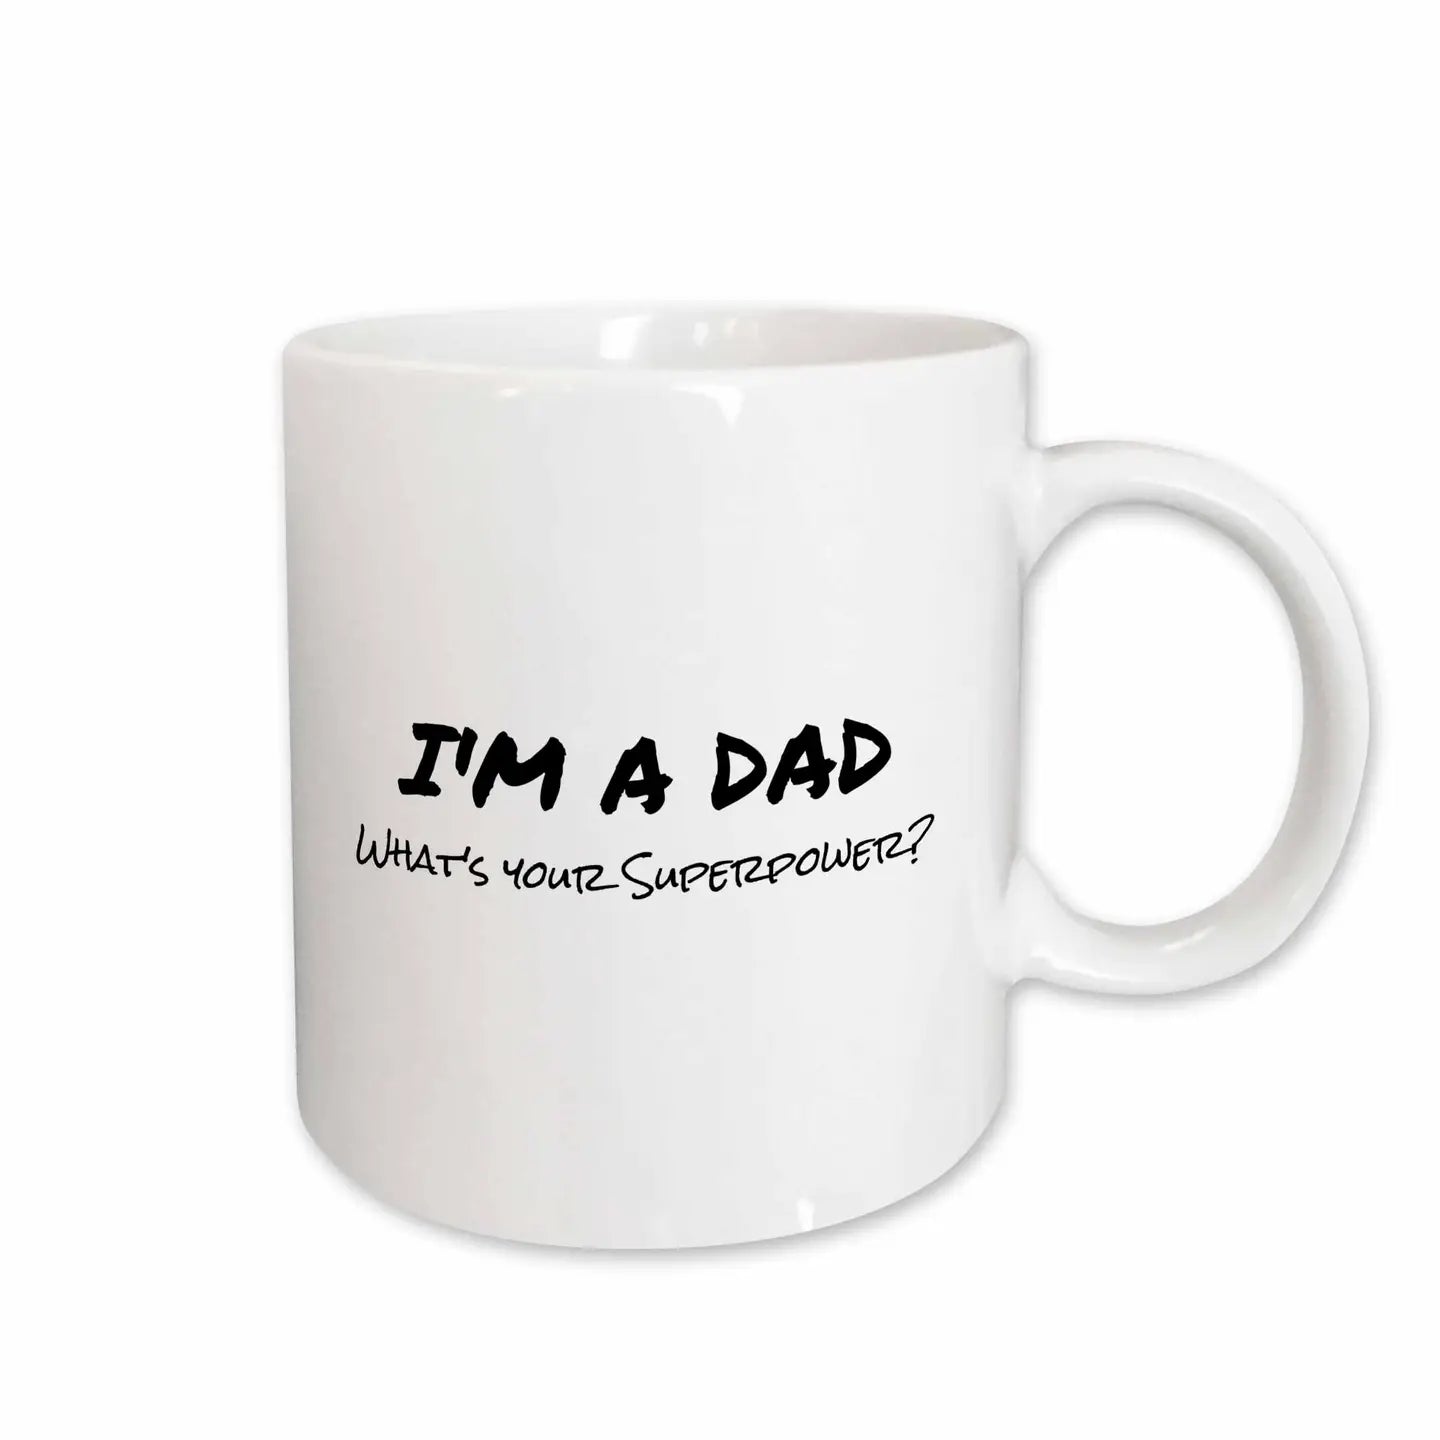 I’m a Dad - what’s your superpower